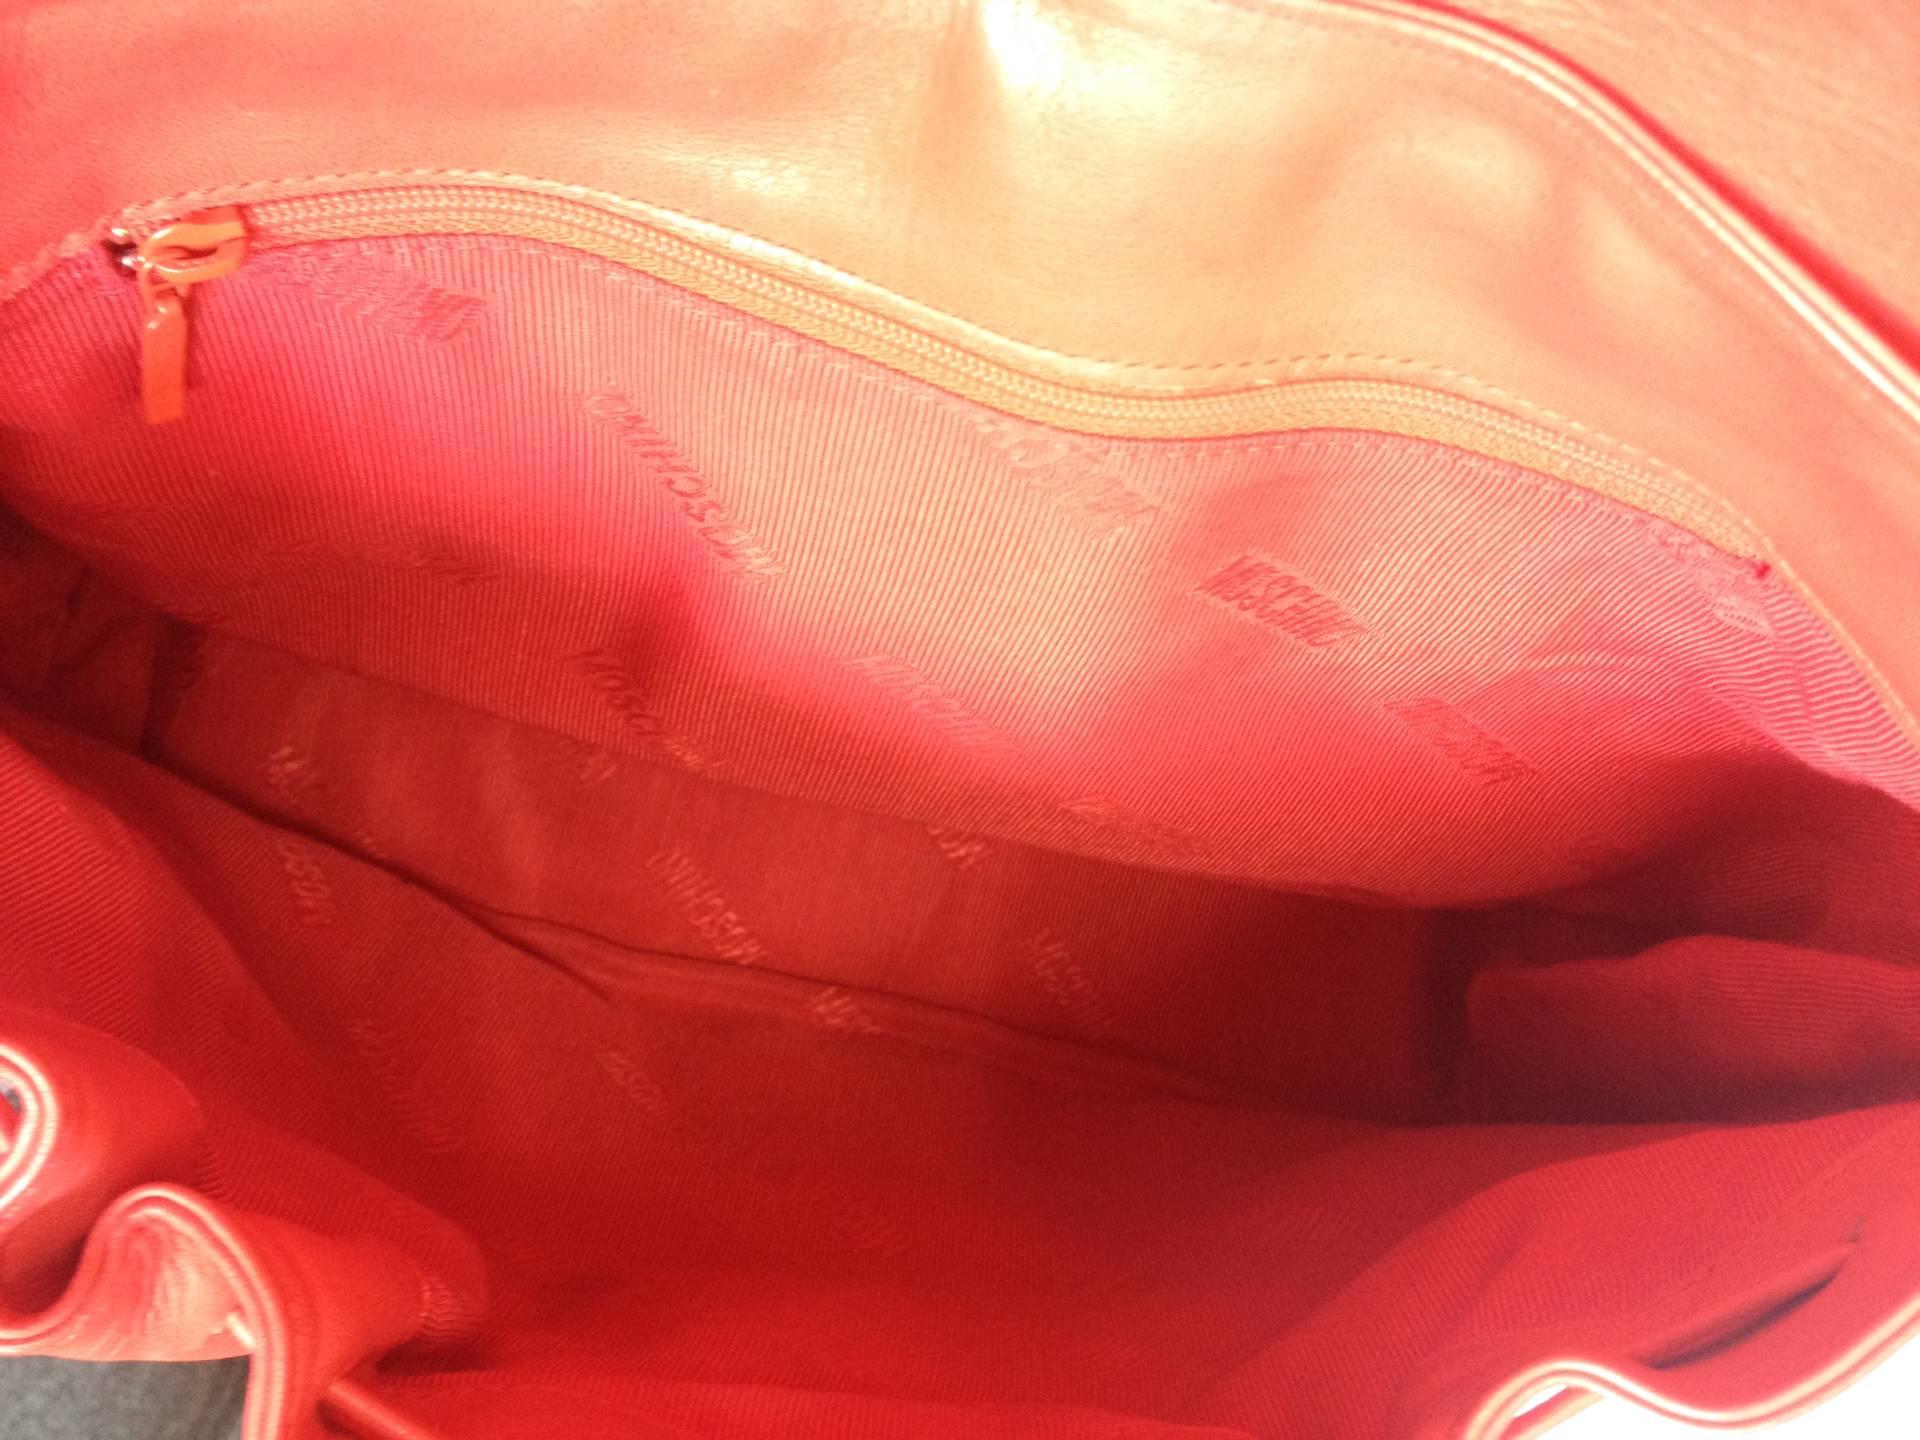 moschino red heart bag vintage